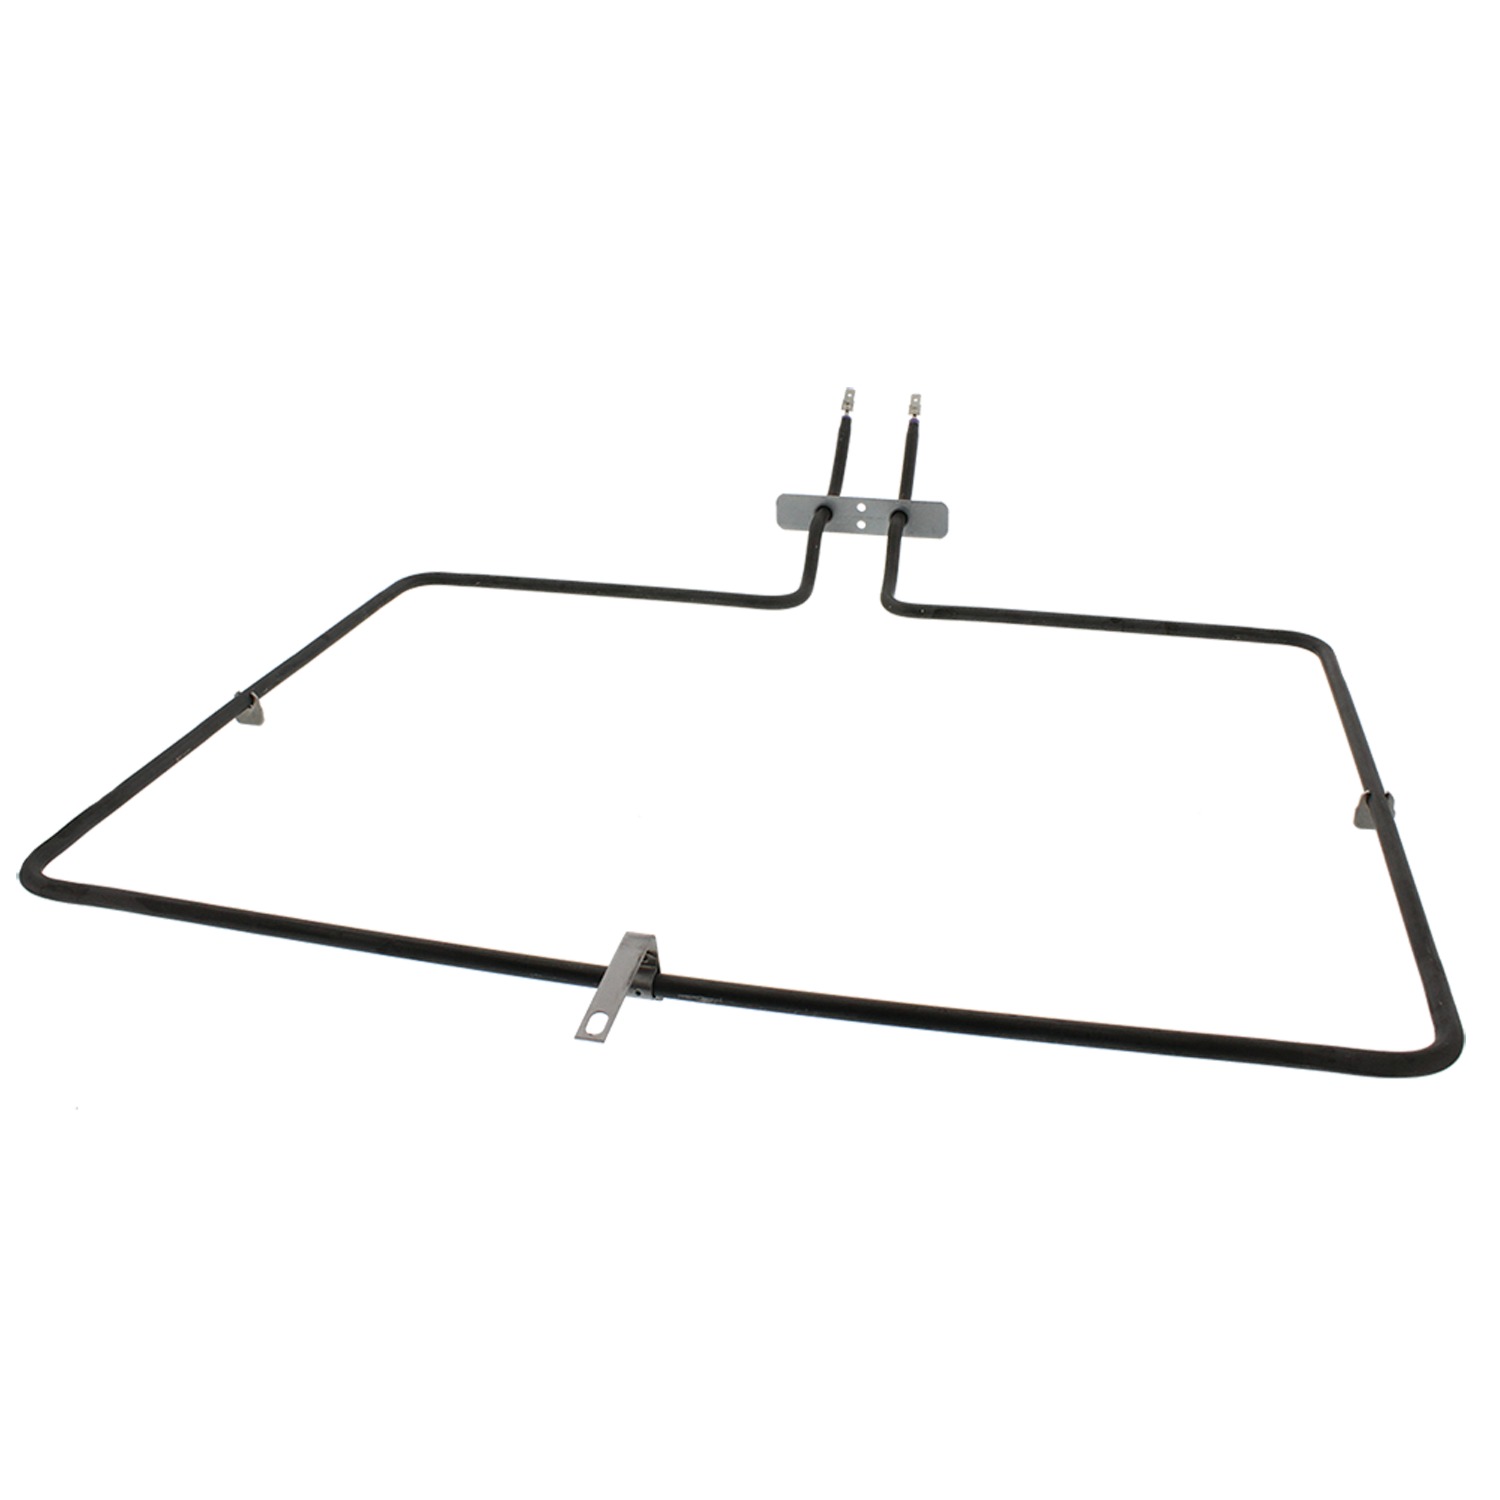 Exact Replacement Parts W10779716 Replacement Oven Bake Element - image 1 of 8